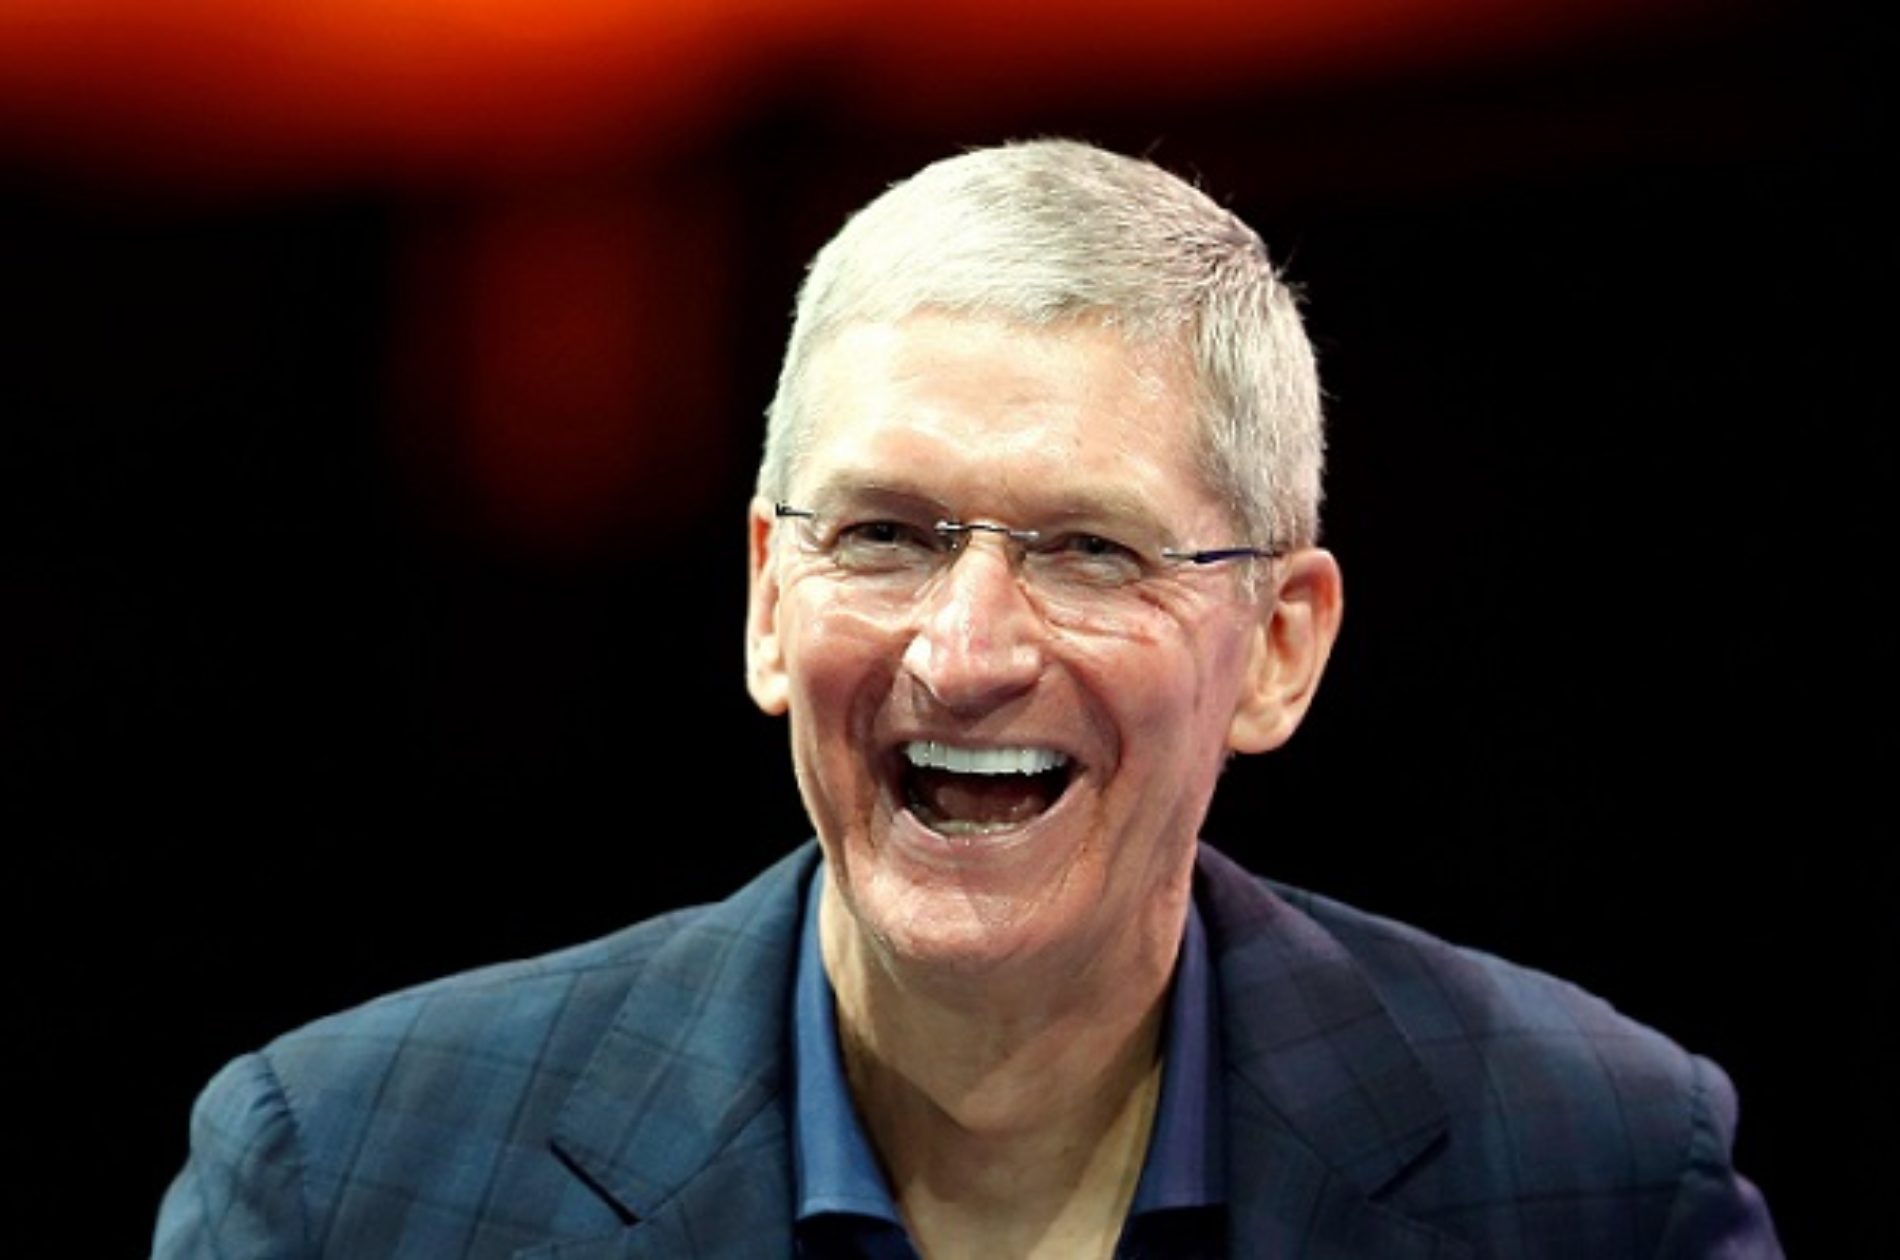 Tim Cook talks about being gay role model